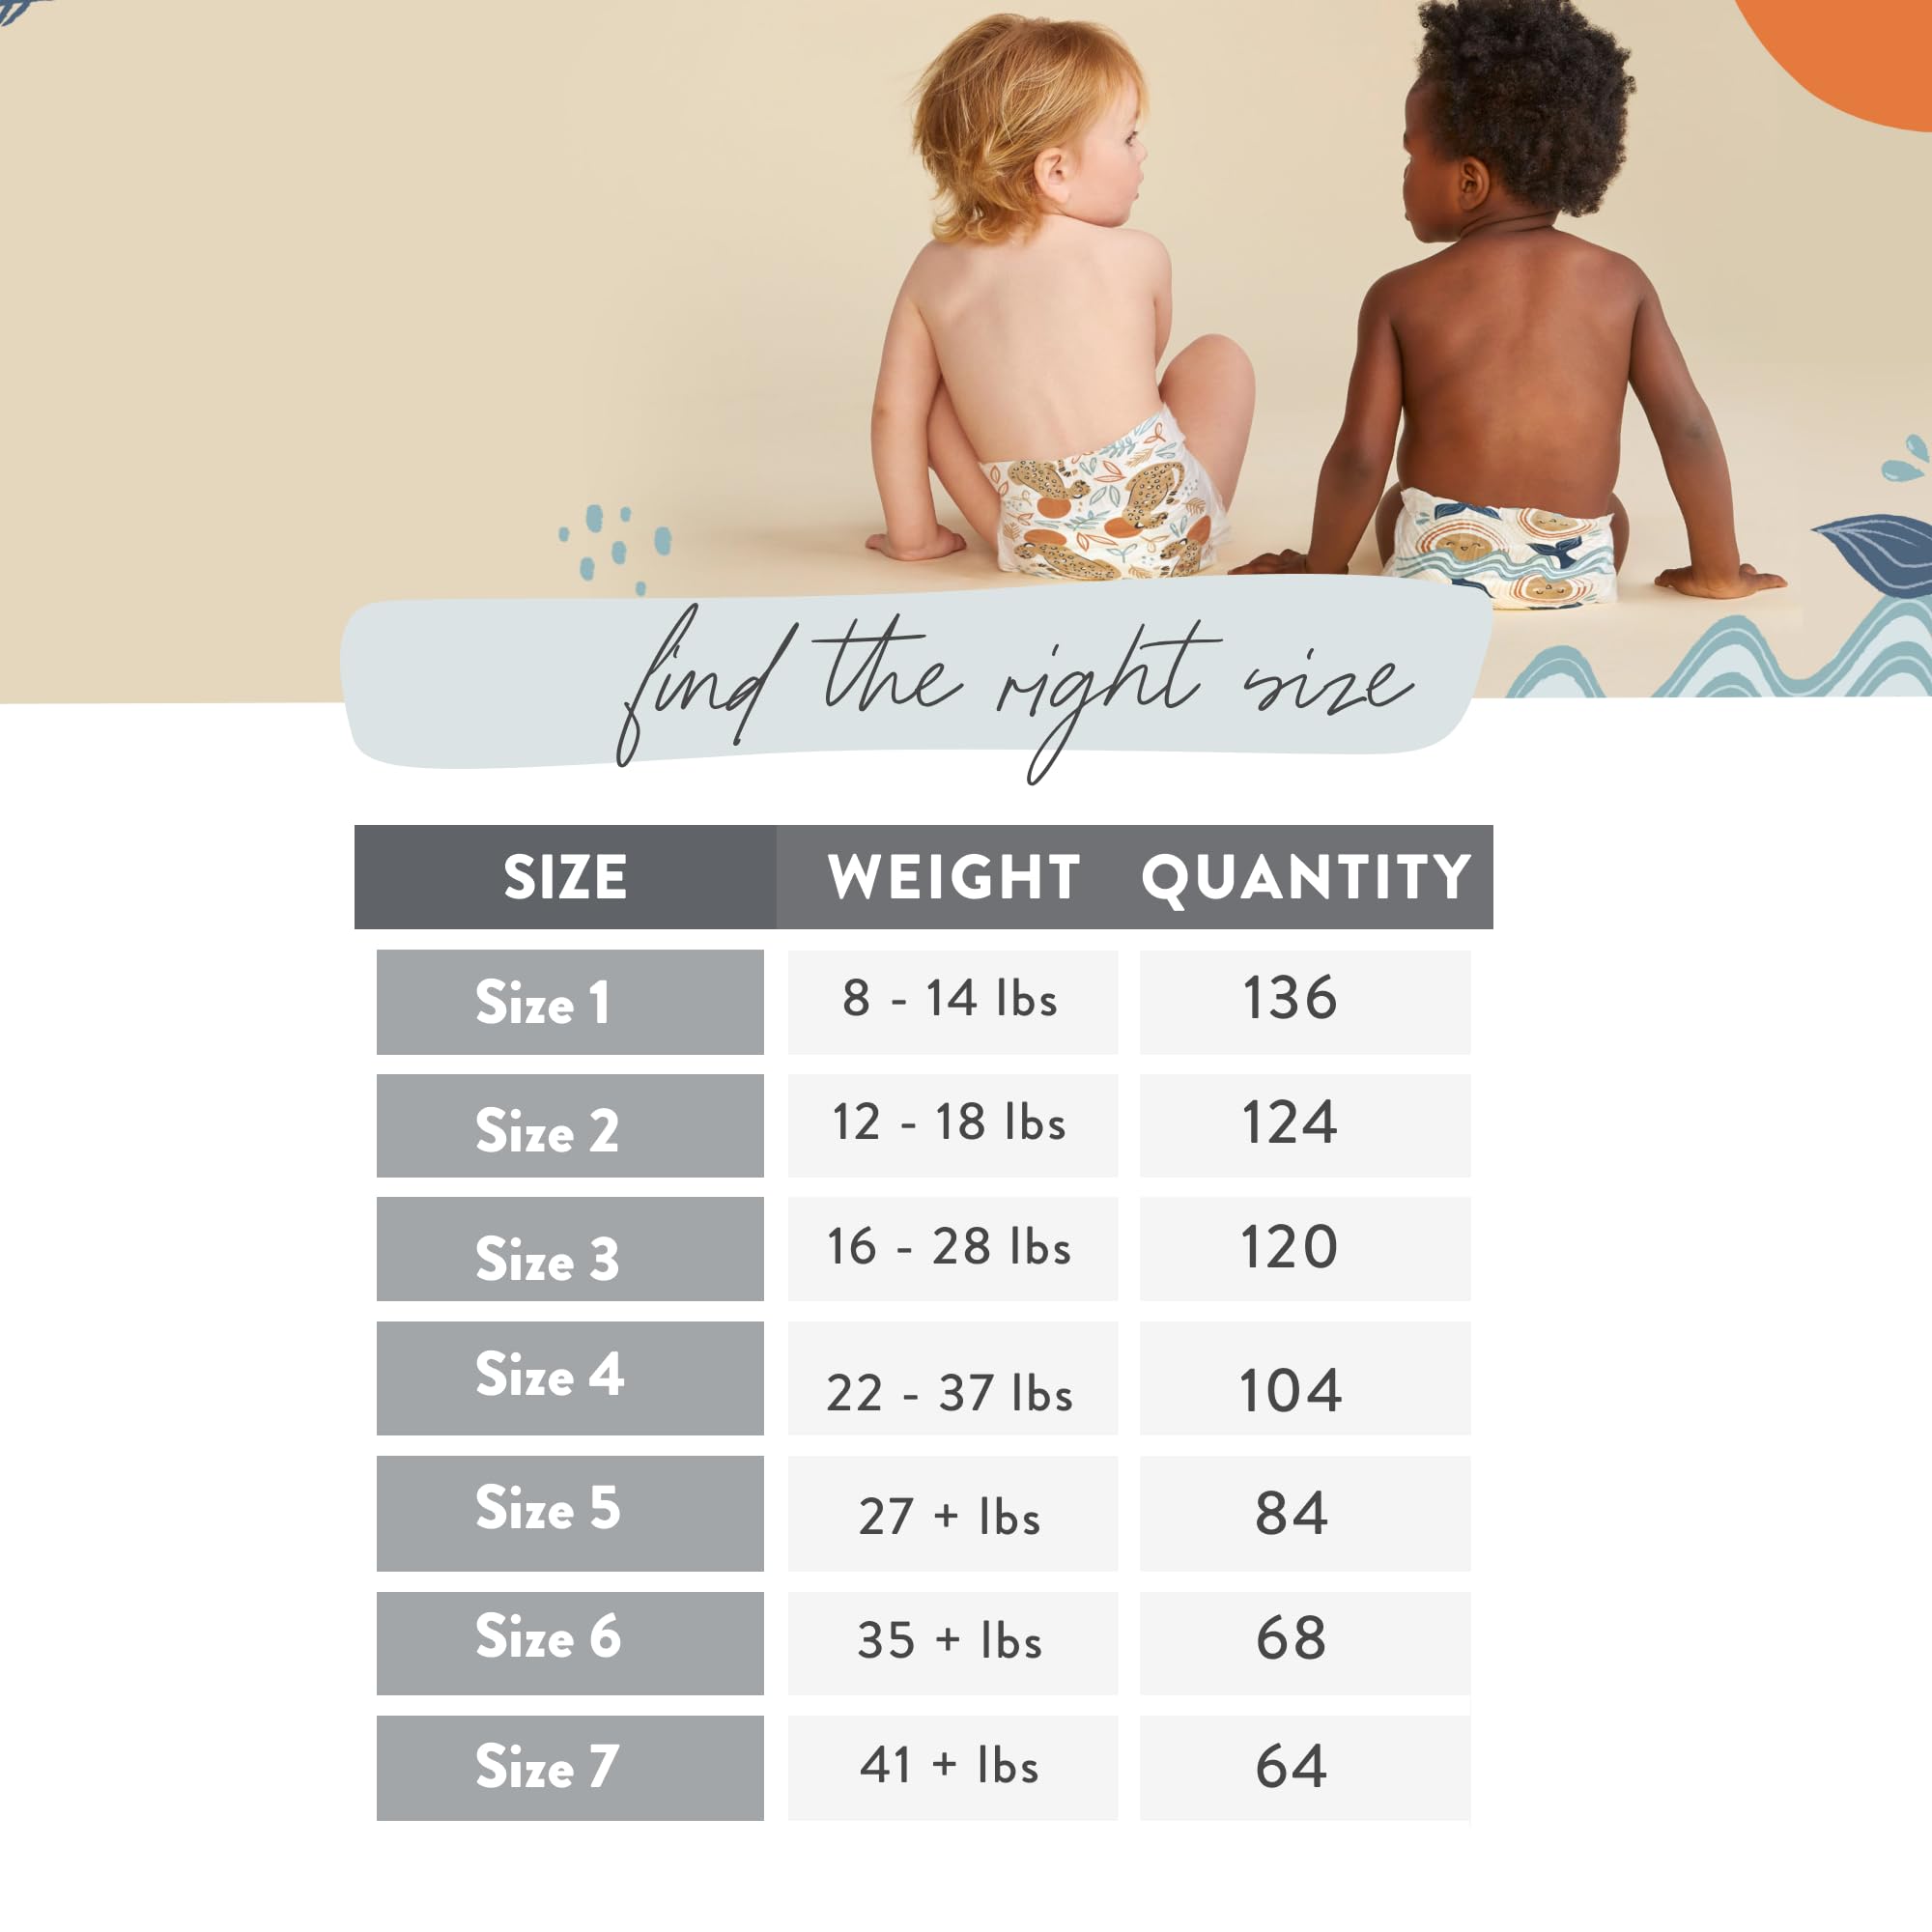 The Honest Company Clean Conscious Diapers | Plant-Based, Sustainable | Just Peachy + Flower Power | Super Club Box, Size 4 (22-37 lbs), 104 Count